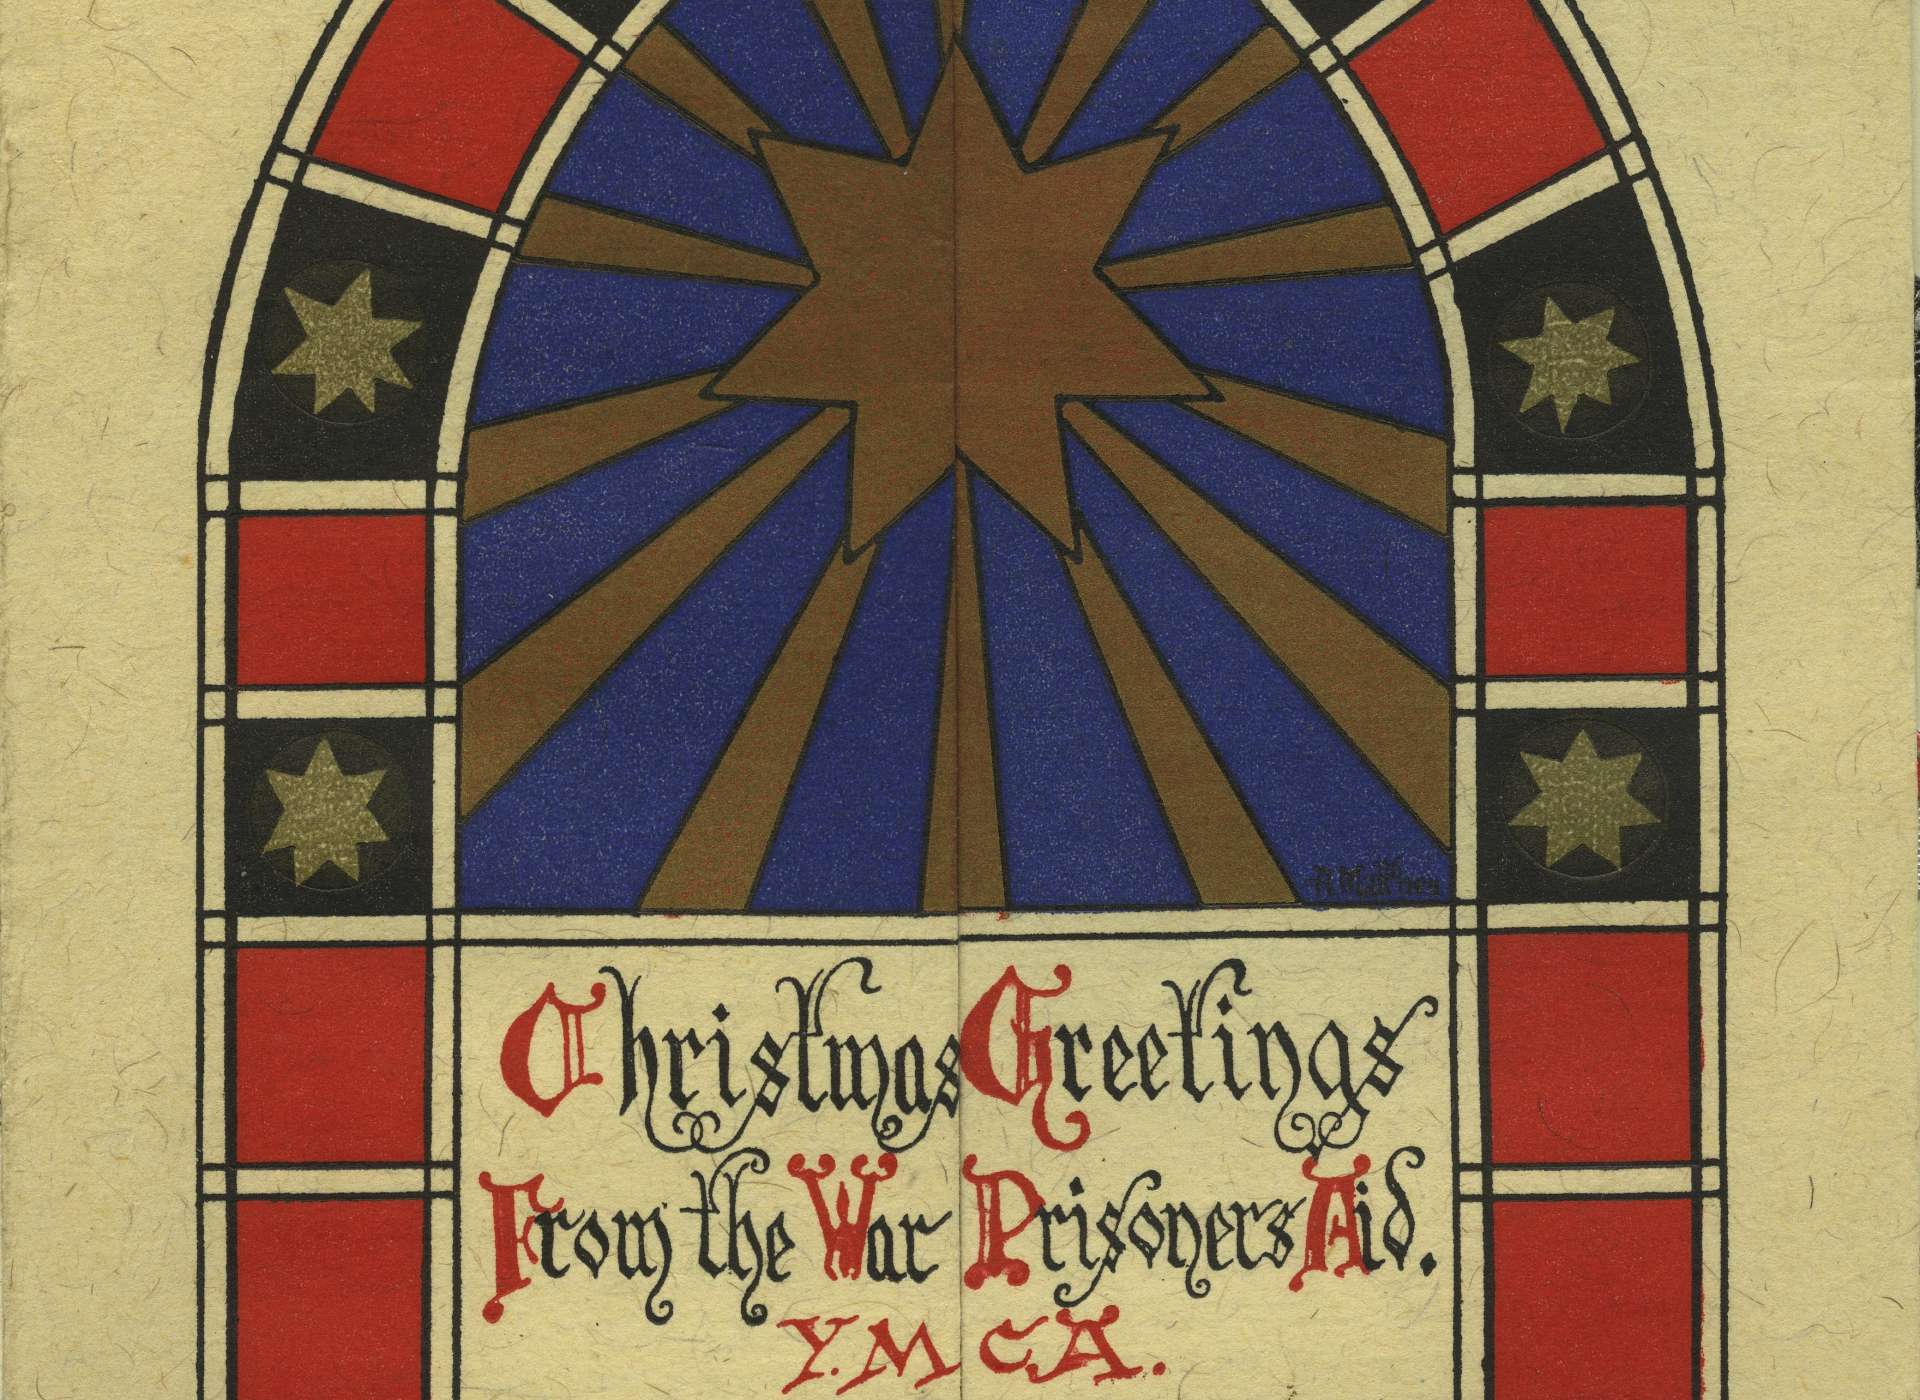 Christmas Card from the War Prisoners Aid of the YMCA